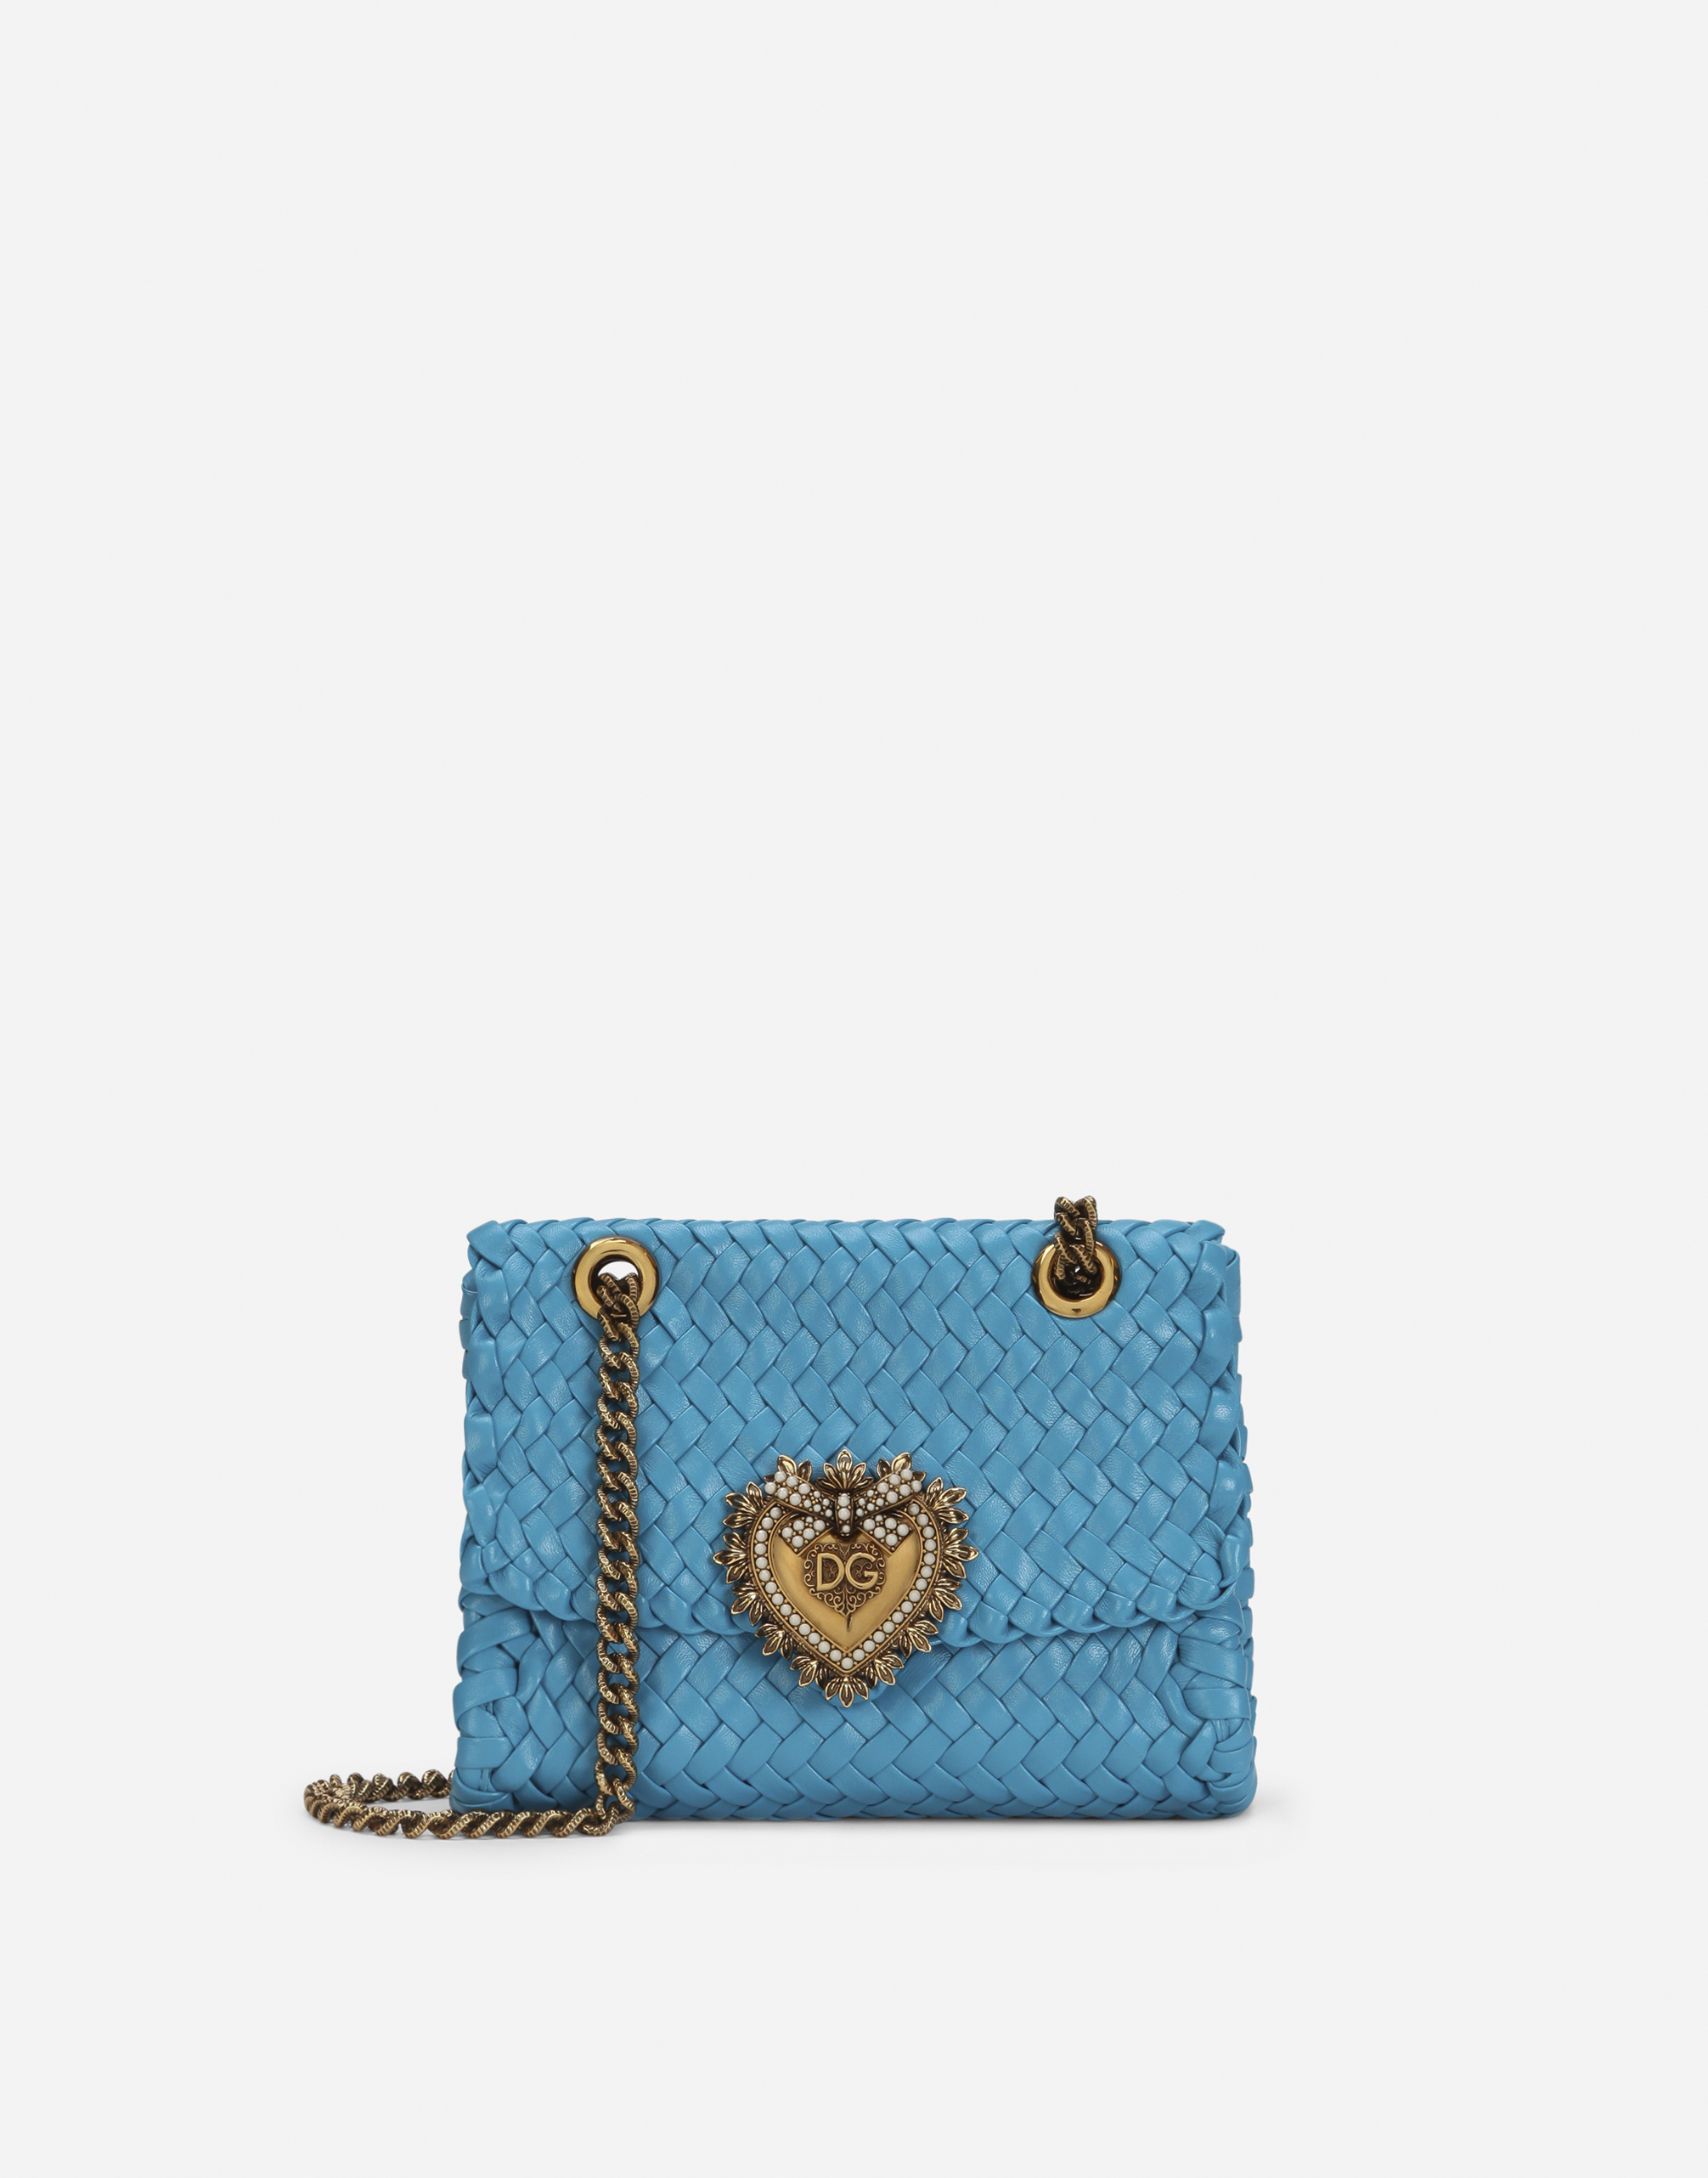 Small Devotion shoulder bag in woven nappa leather in Turquoise